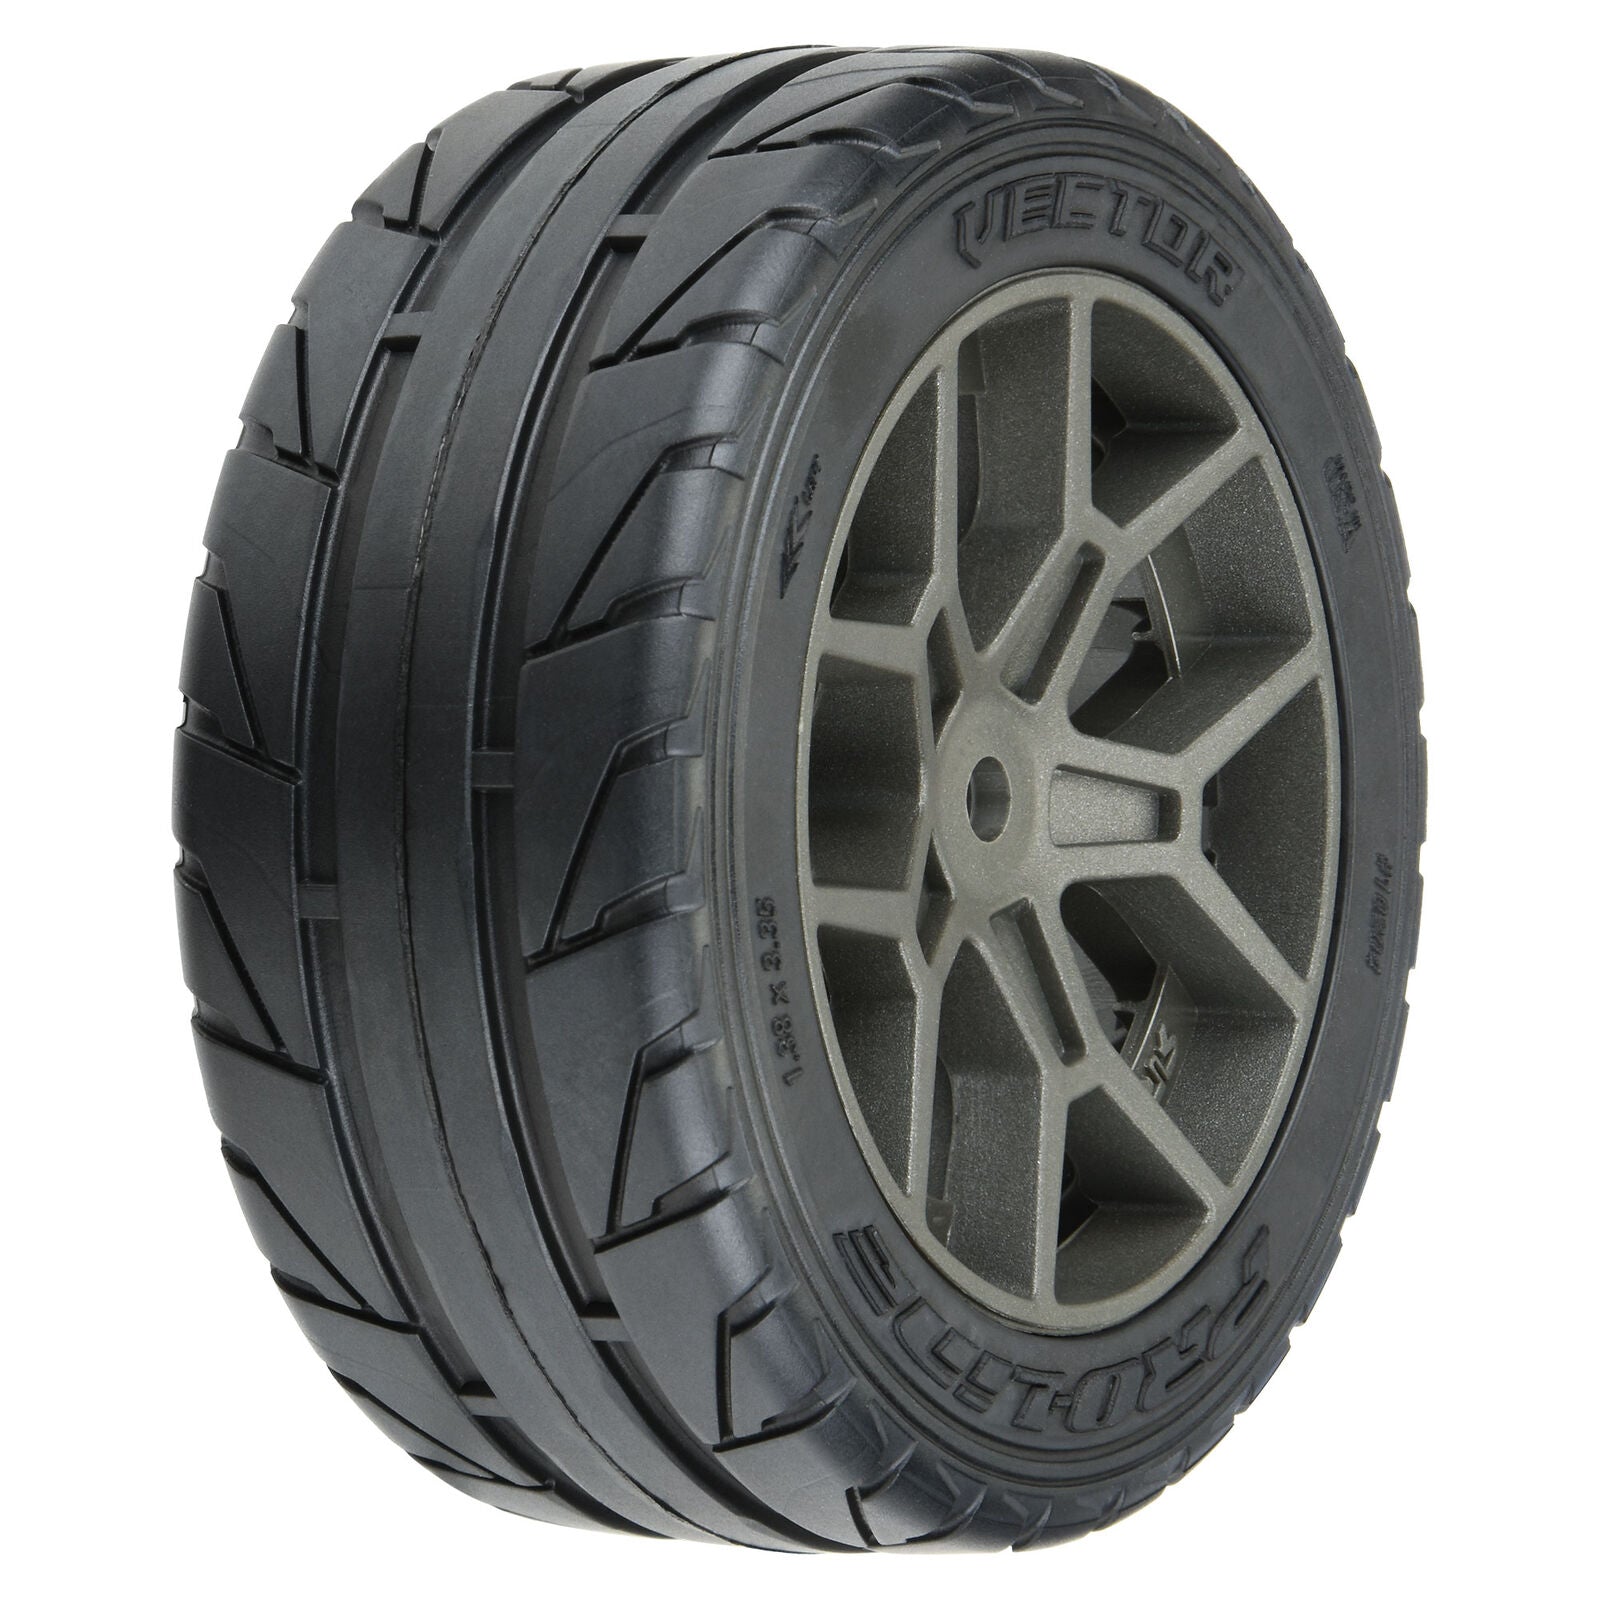 PROLINE 10204-10 1/8 Vector S3 Front/Rear 35/85 2.4" Belted Mounted Tires, 14mm Gray: Vendetta